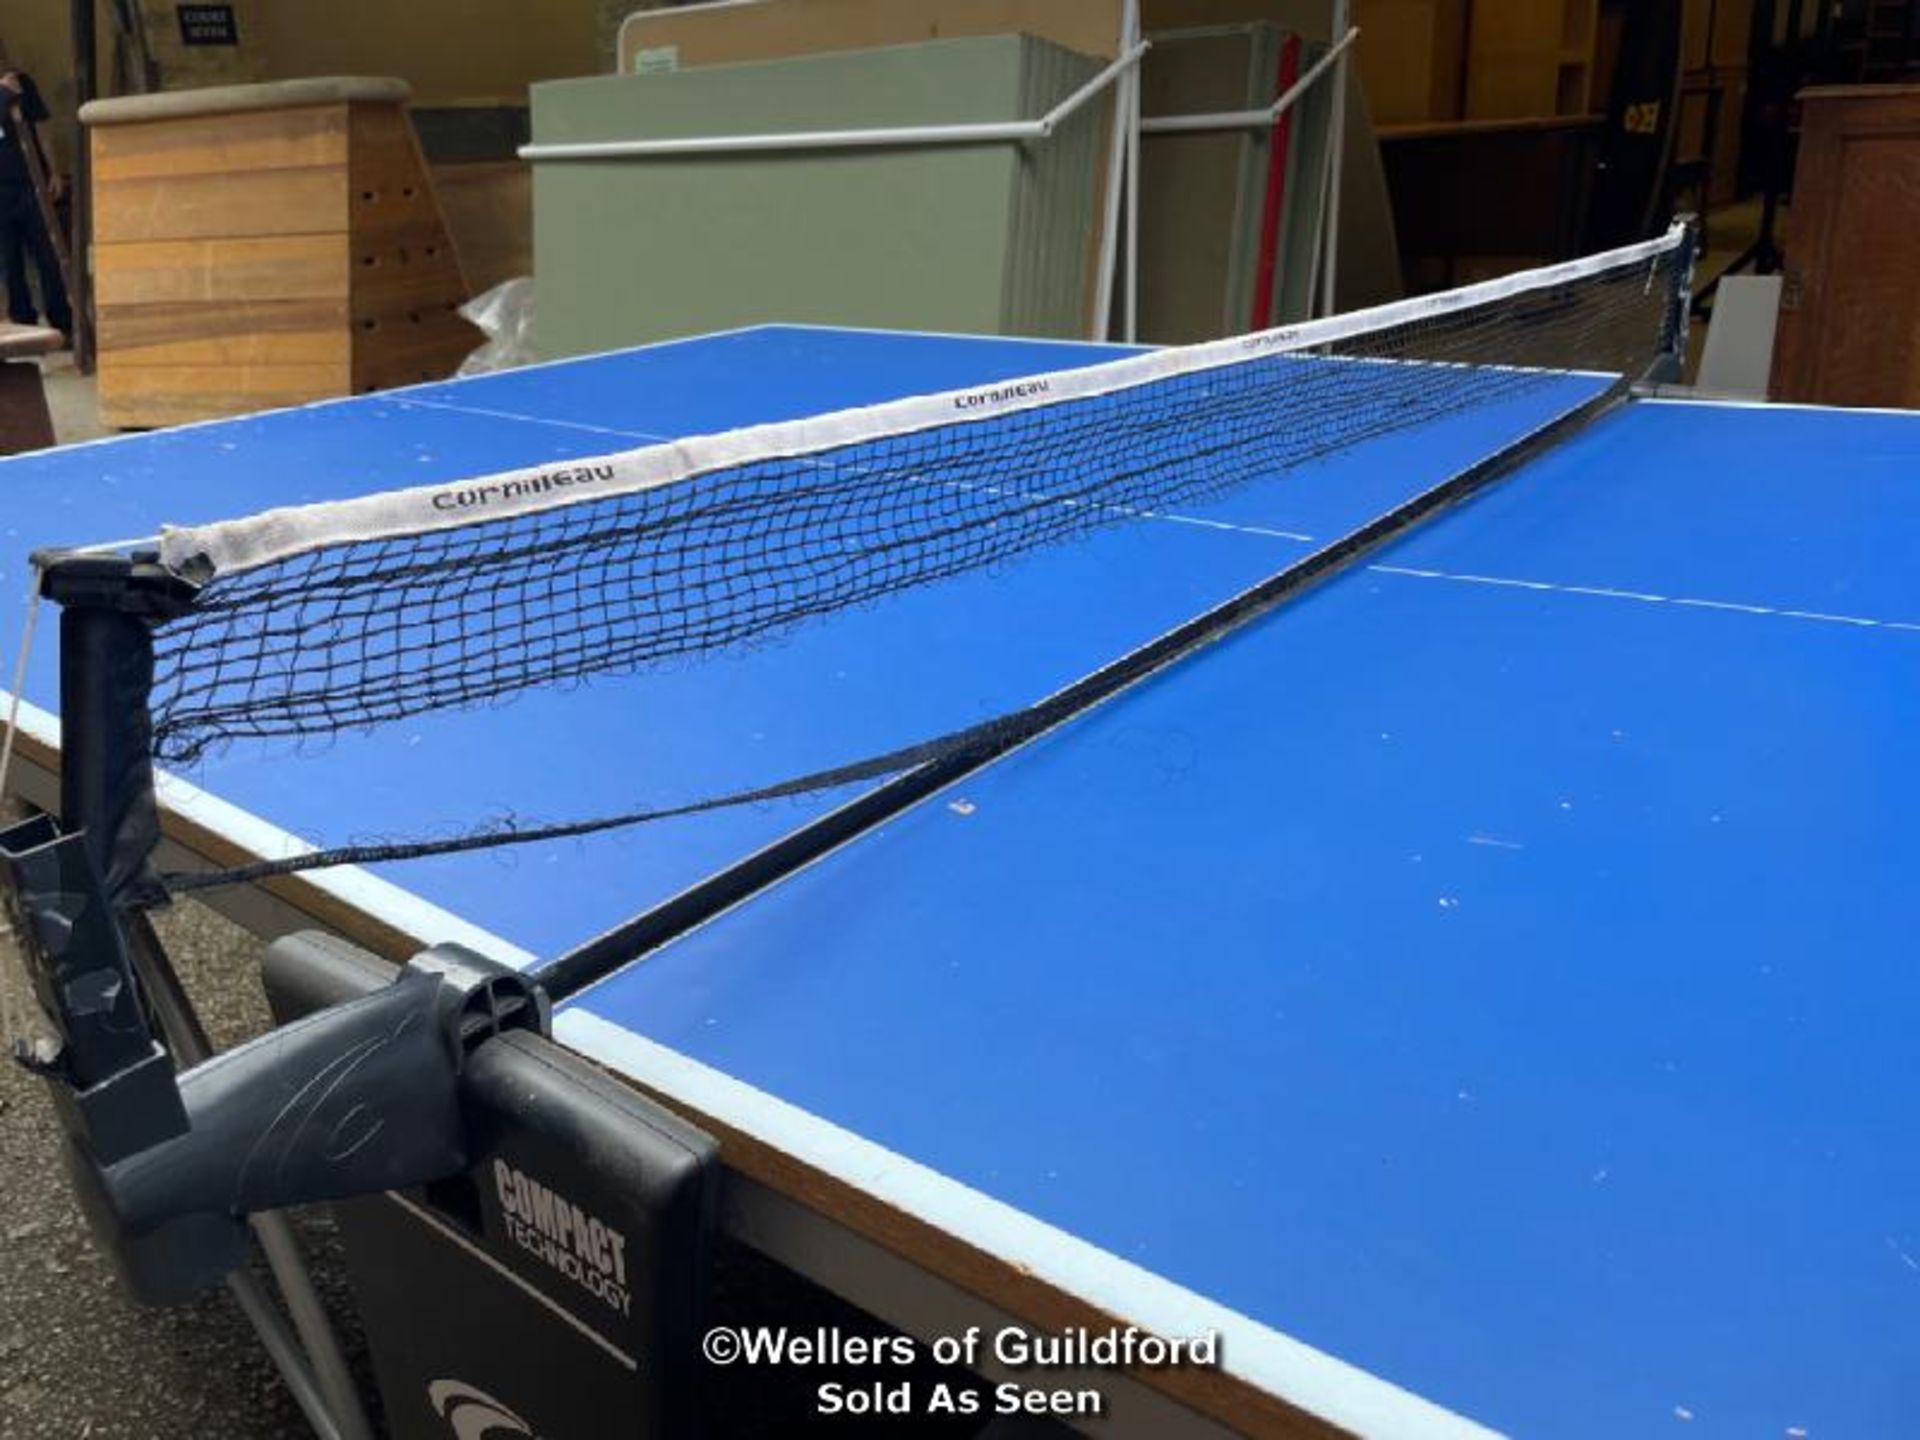 *CORNILLEAU FOLDING TABLE TENNIS TABLE WITH NET, NET NEEDS REPLACING ND NET FIXINGS NEED SORTING - - Image 6 of 6